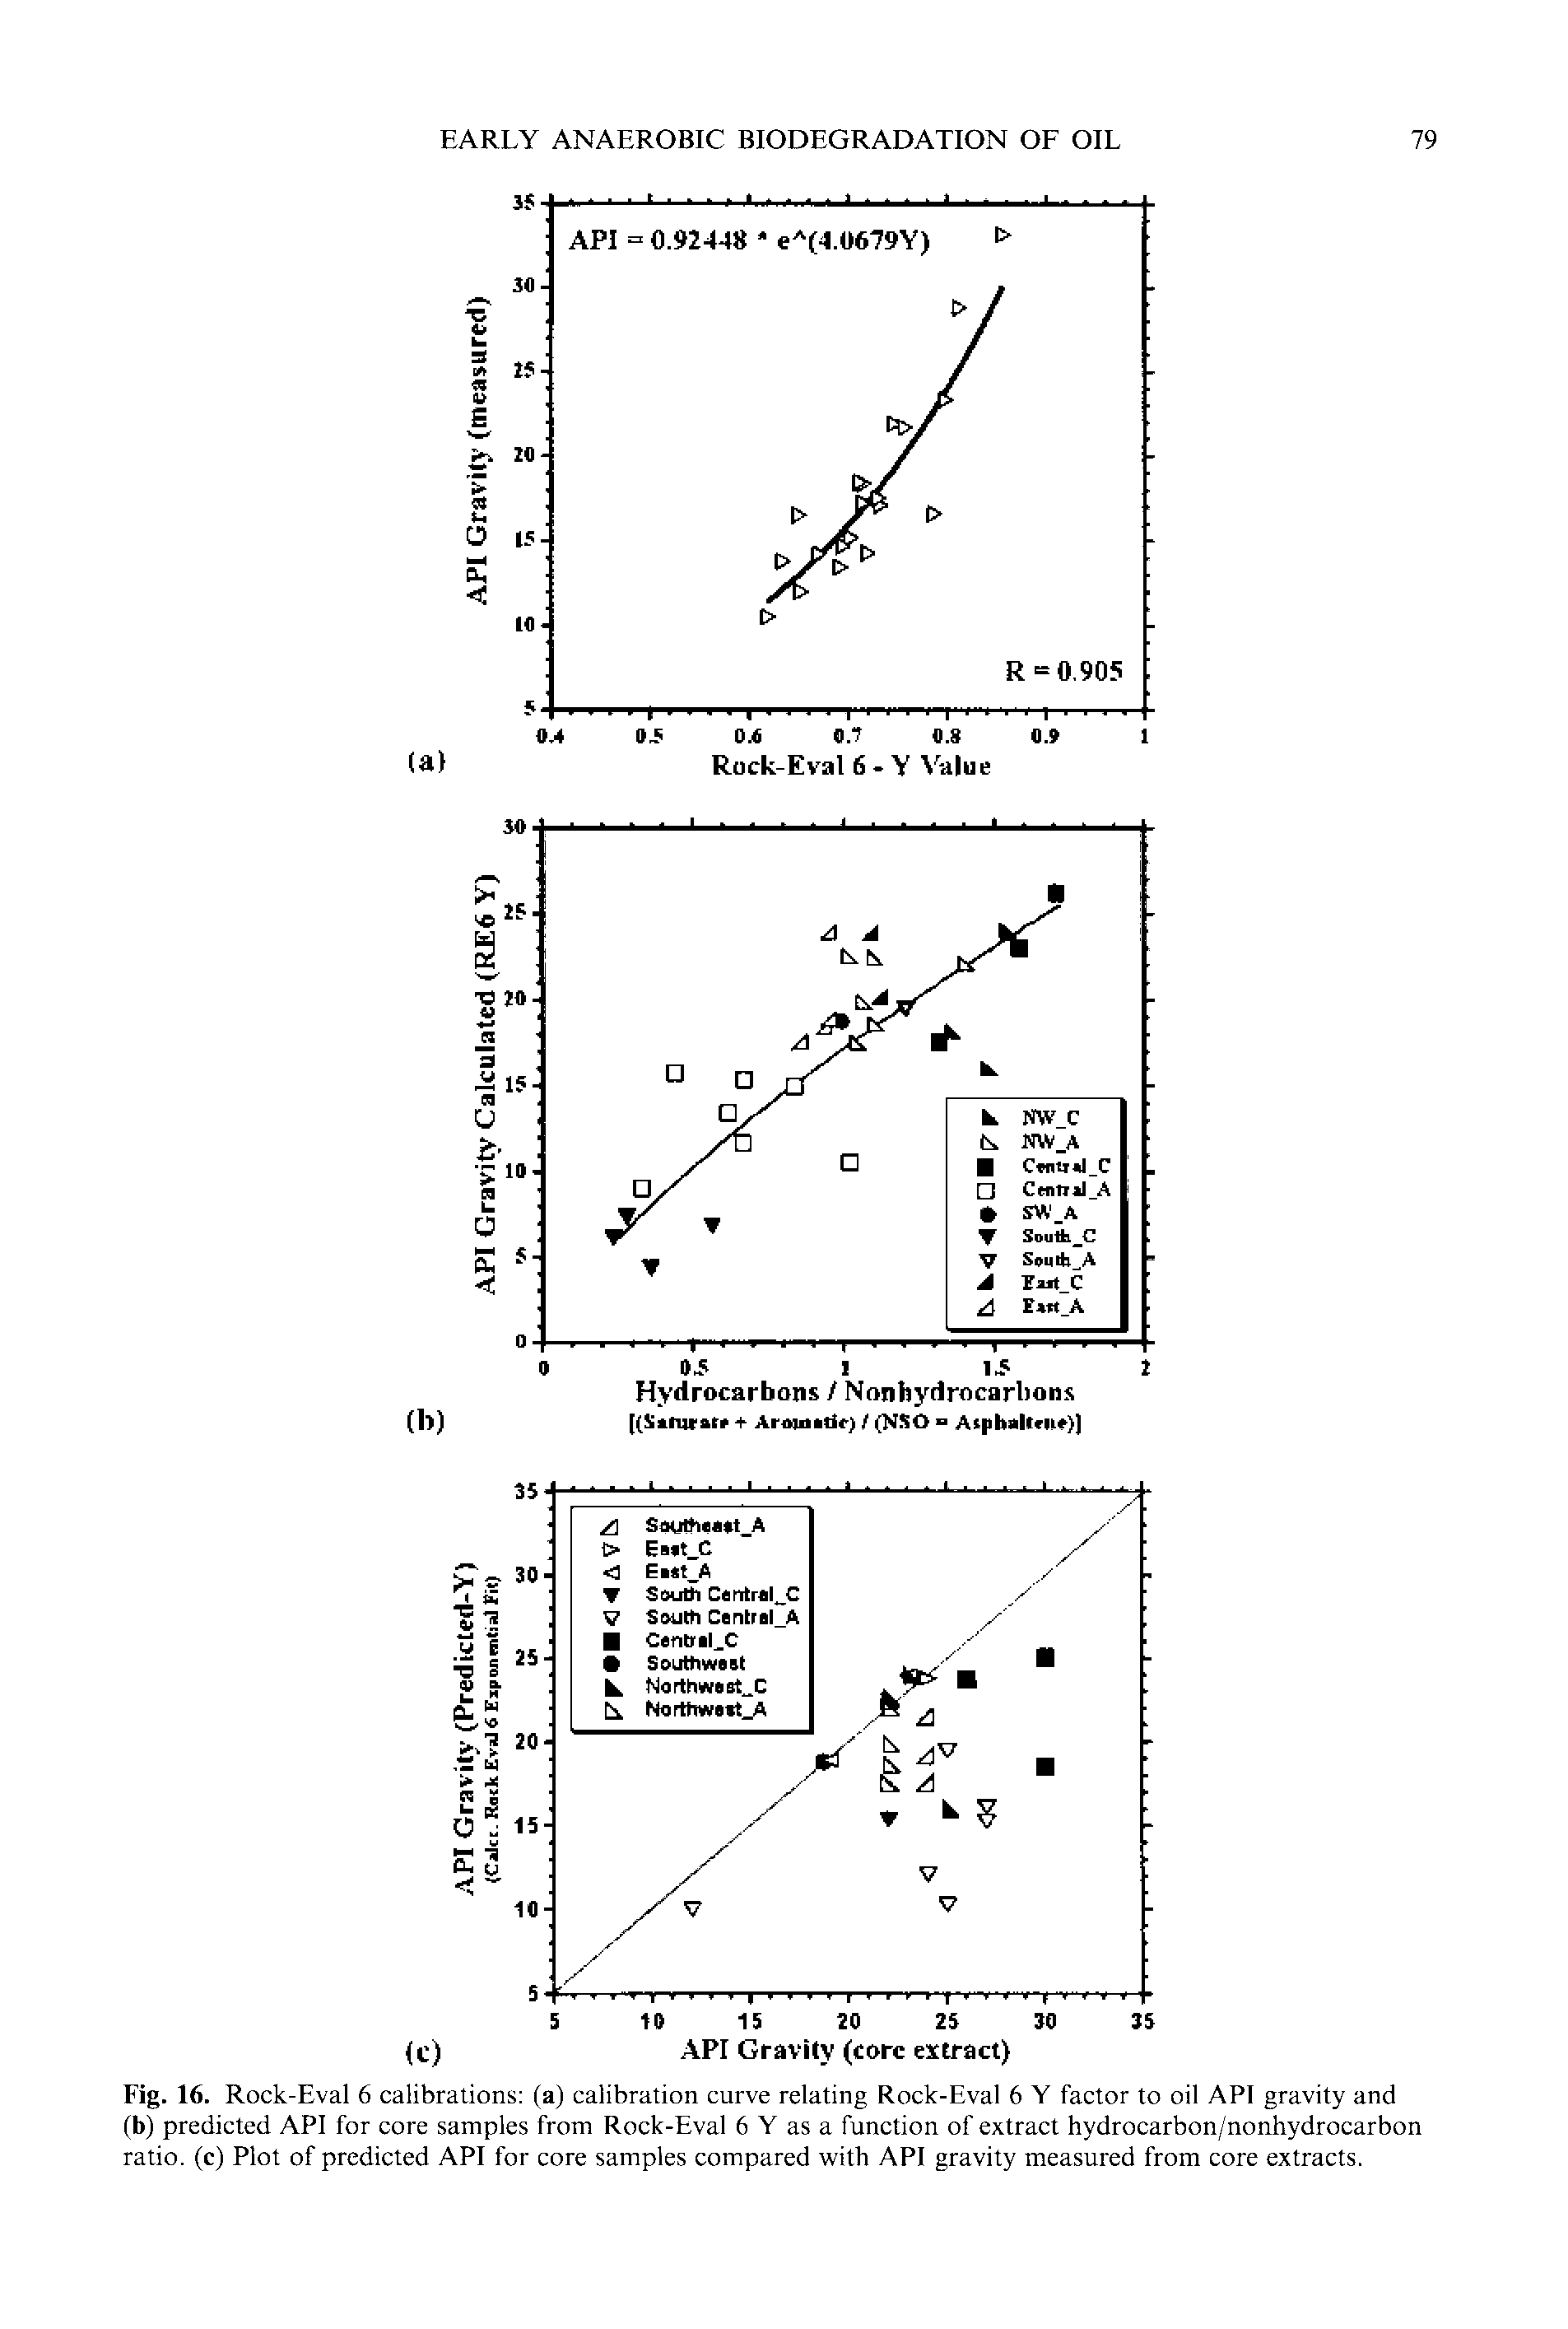 Fig. 16. Rock-Eval 6 calibrations (a) calibration curve relating Rock-Eval 6 Y factor to oil API gravity and (b) predicted API for core samples from Rock-Eval 6 Y as a function of extract hydrocarbon/nonhydrocarbon ratio, (c) Plot of predicted API for core samples compared with API gravity measured from core extracts.